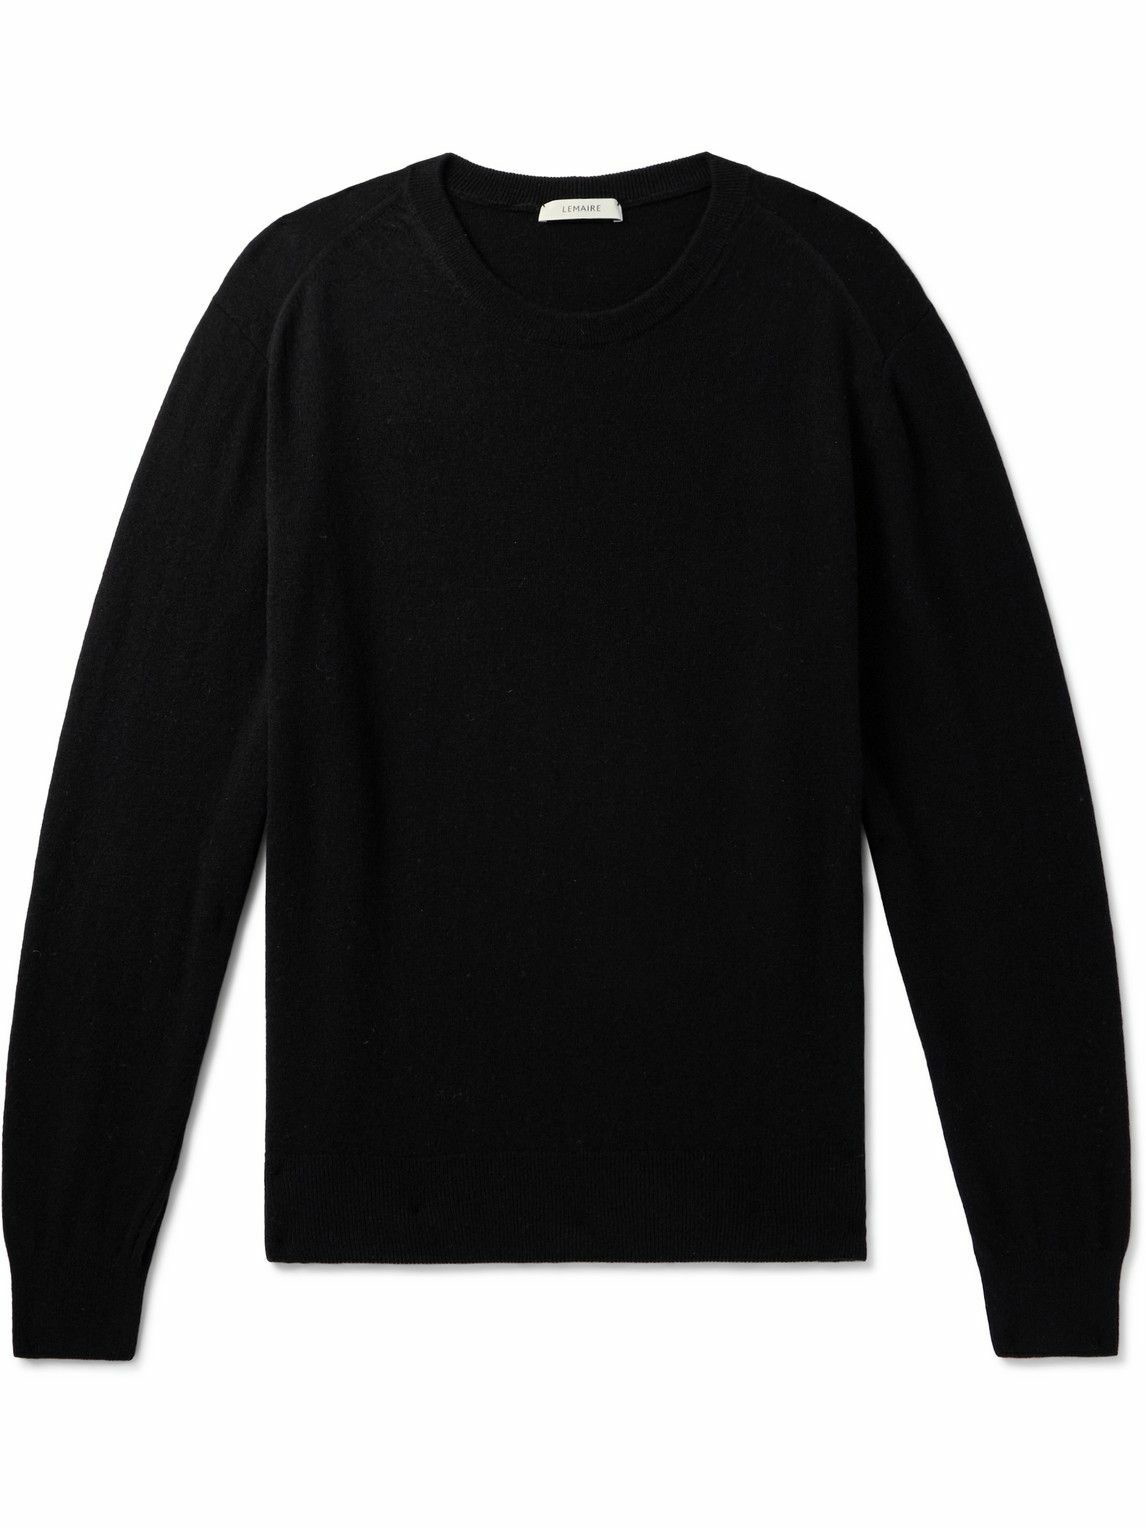 Photo: LEMAIRE - Wool-Blend Sweater - Black